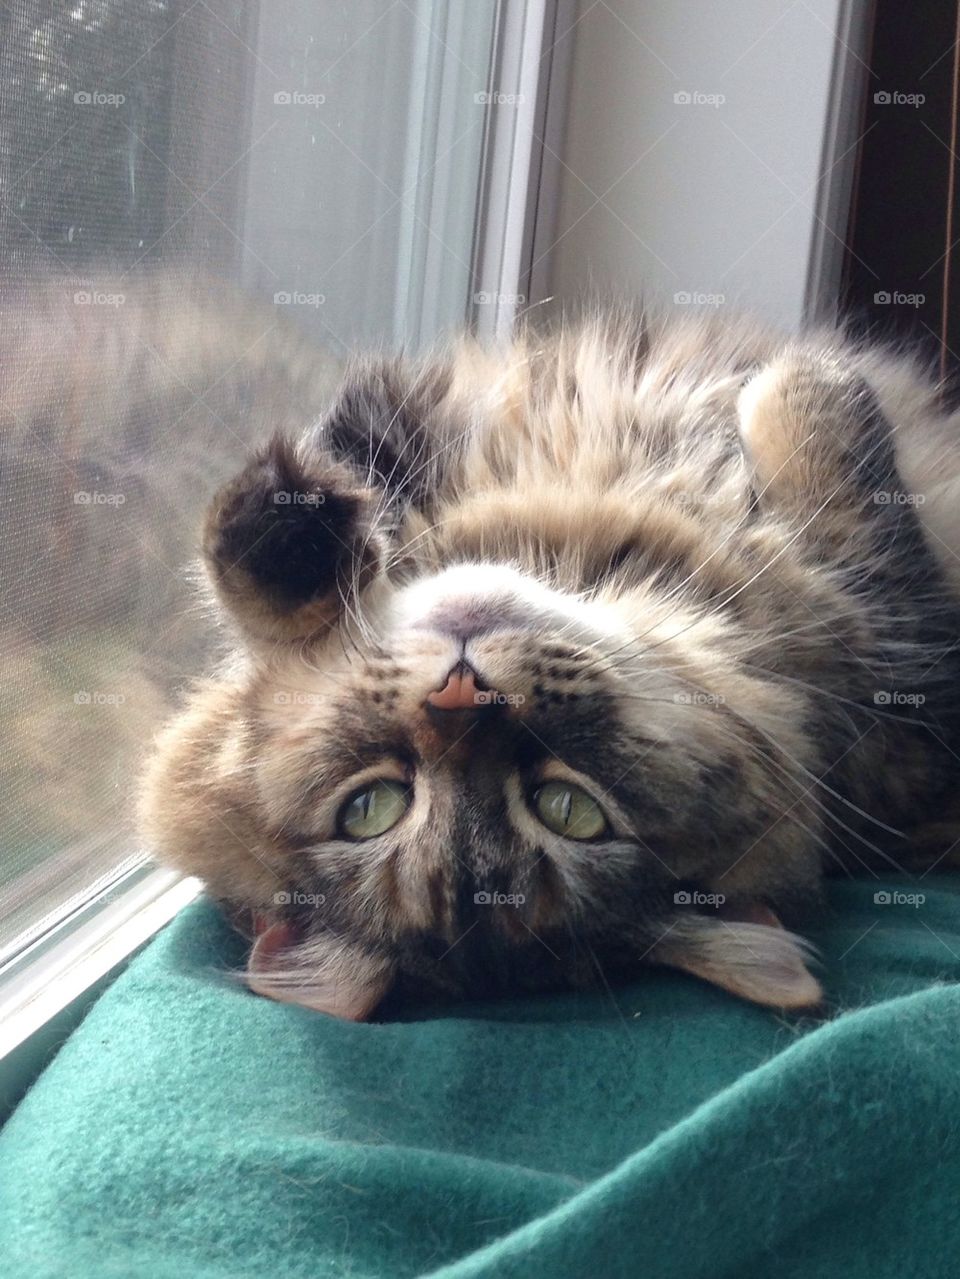 Kitty laying down by window